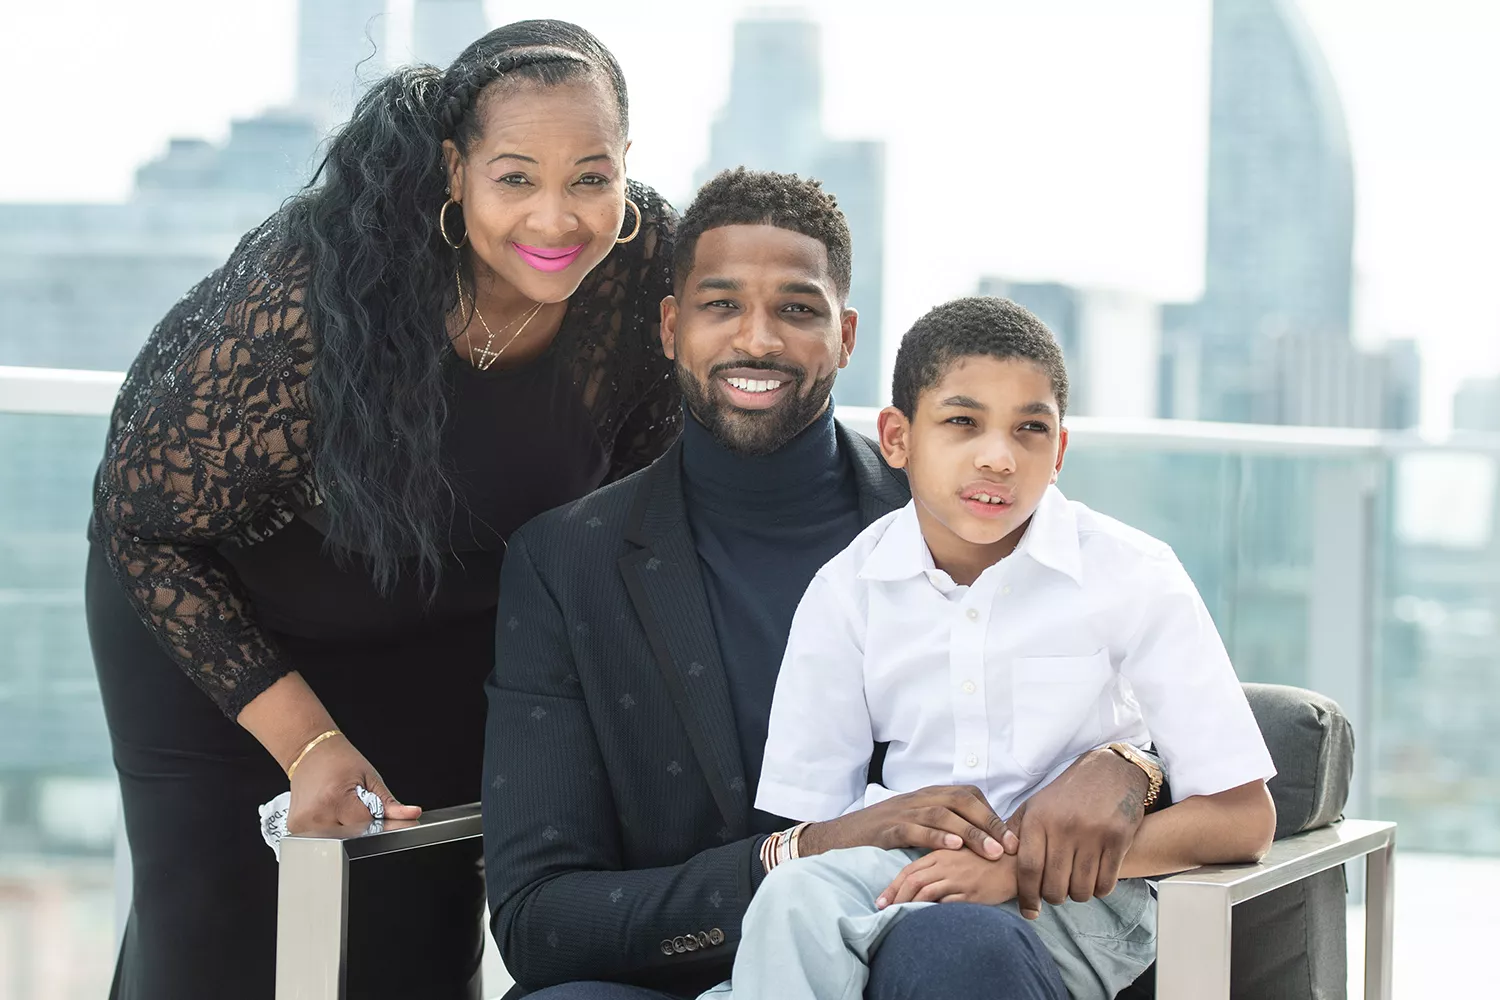 Mother Andrea Thompson, NBA Player Tristan Thompson and brother Amari Thompson attend The Amari Thompson Soiree in support of Epilepsy Toronto at The Globe and Mail Centre on August 9, 2018 in Toronto, Canada.